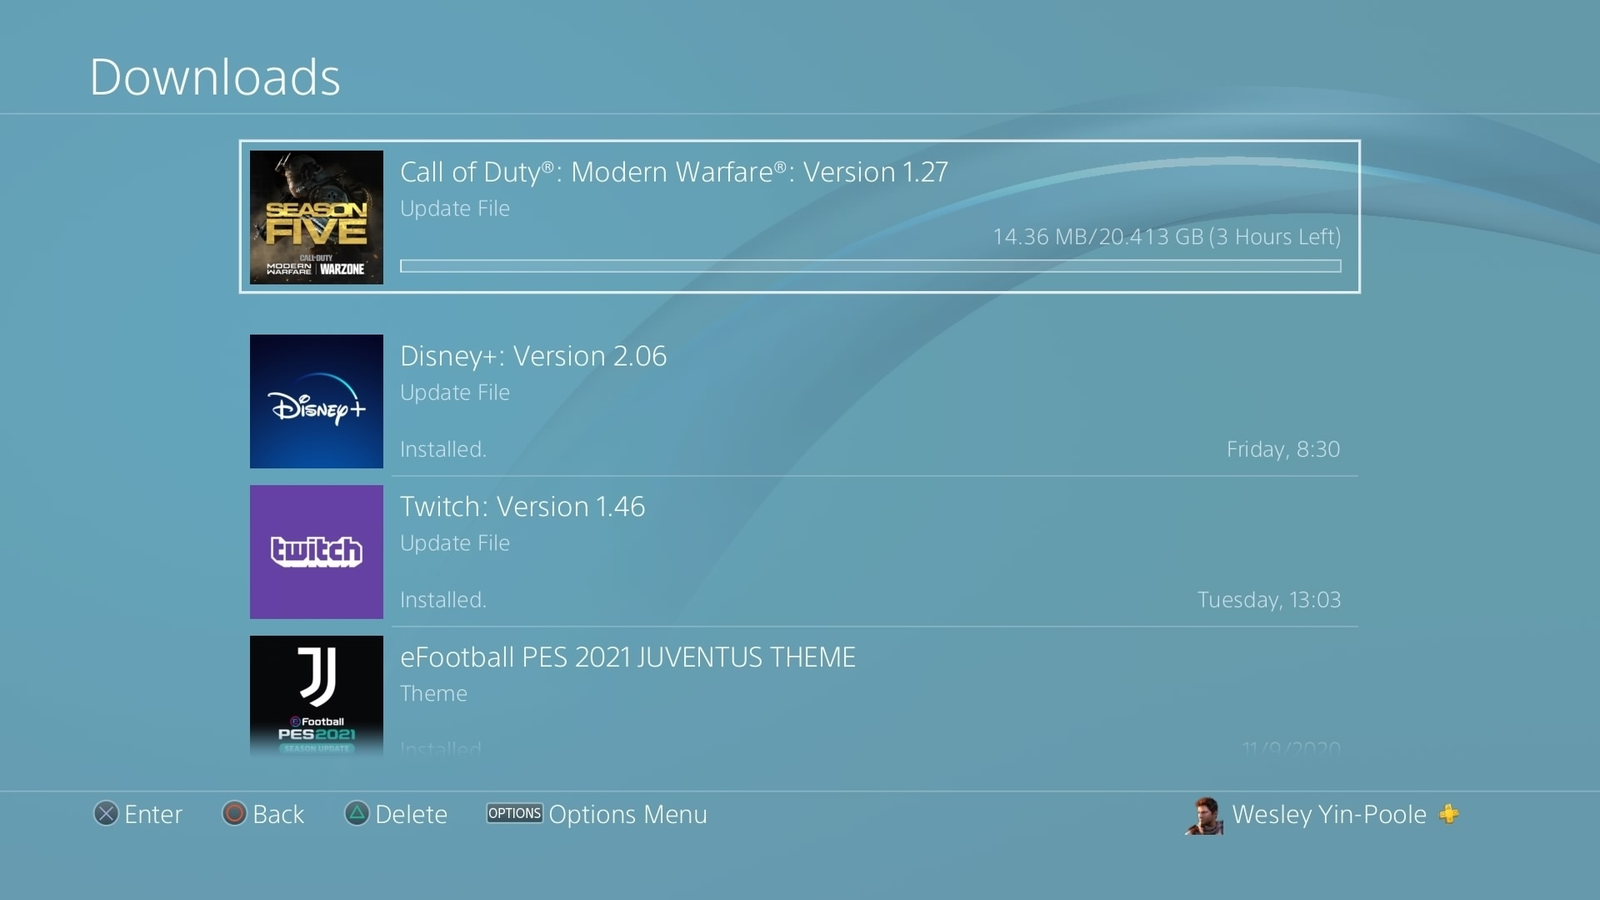 Modern Warfare 2 and Warzone Season 6 update size - How big is the download?